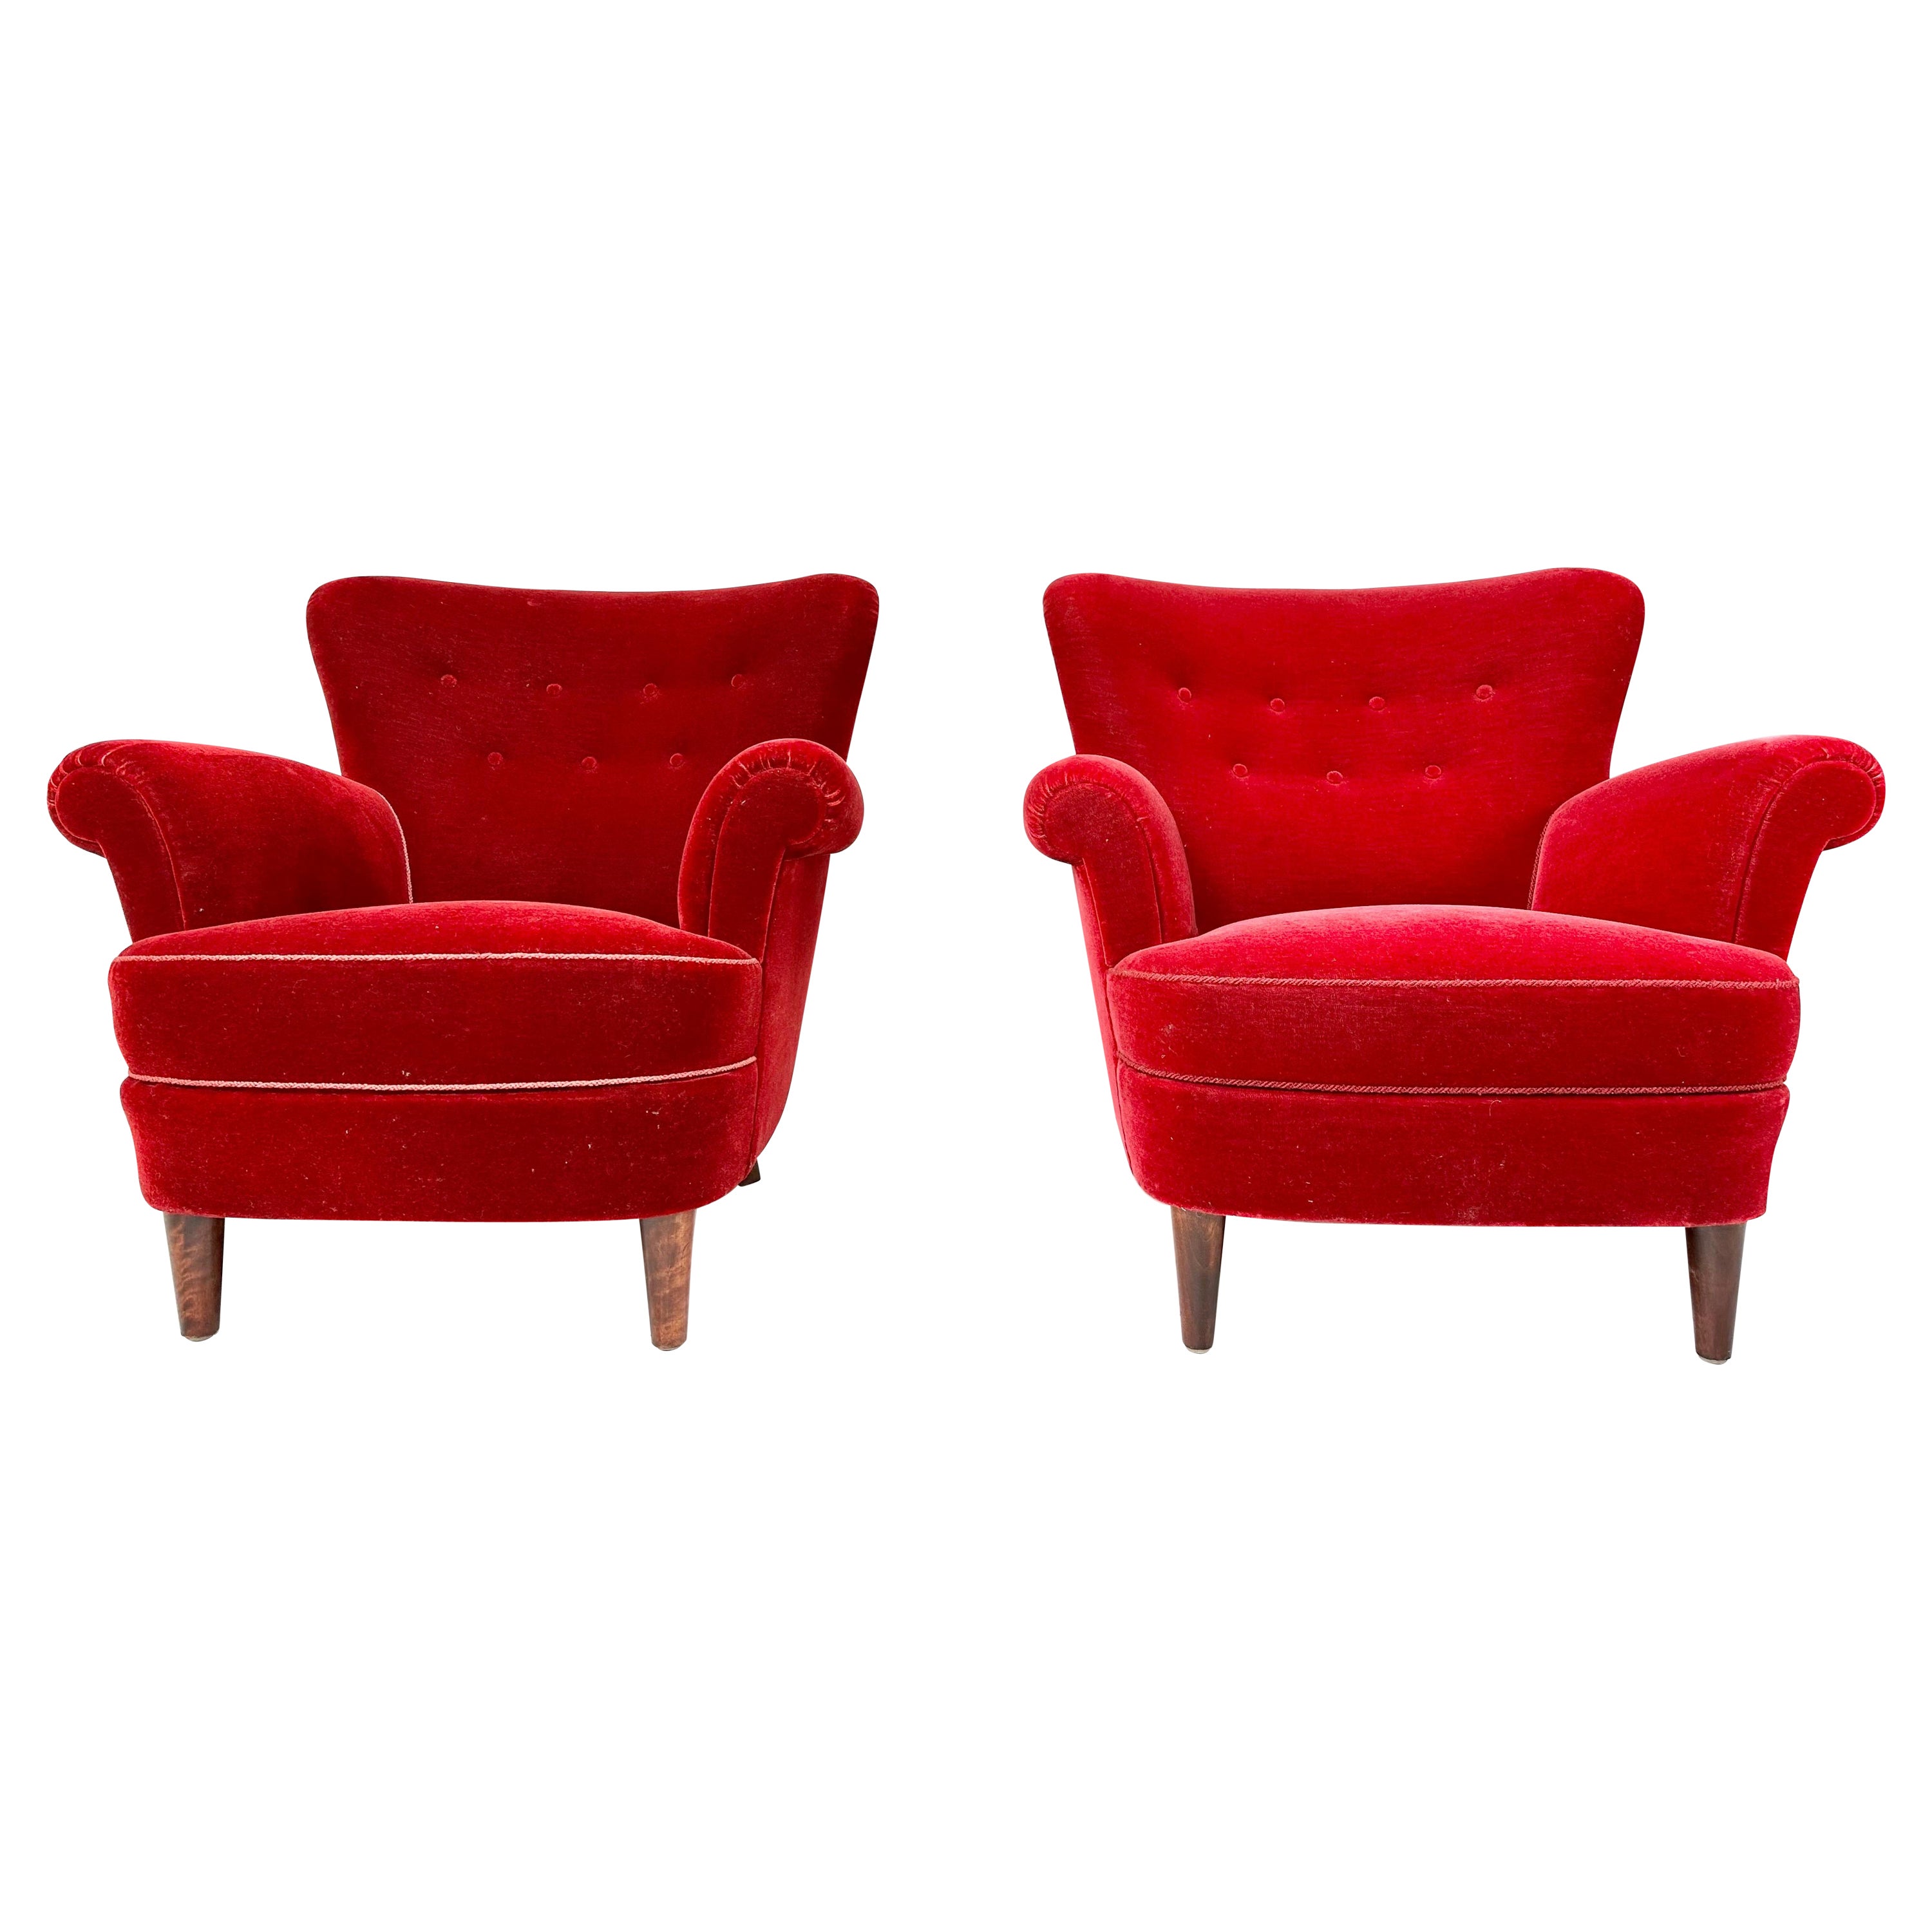 Pair of 1940’s Red Velvet Danish Lounge Chairs  For Sale